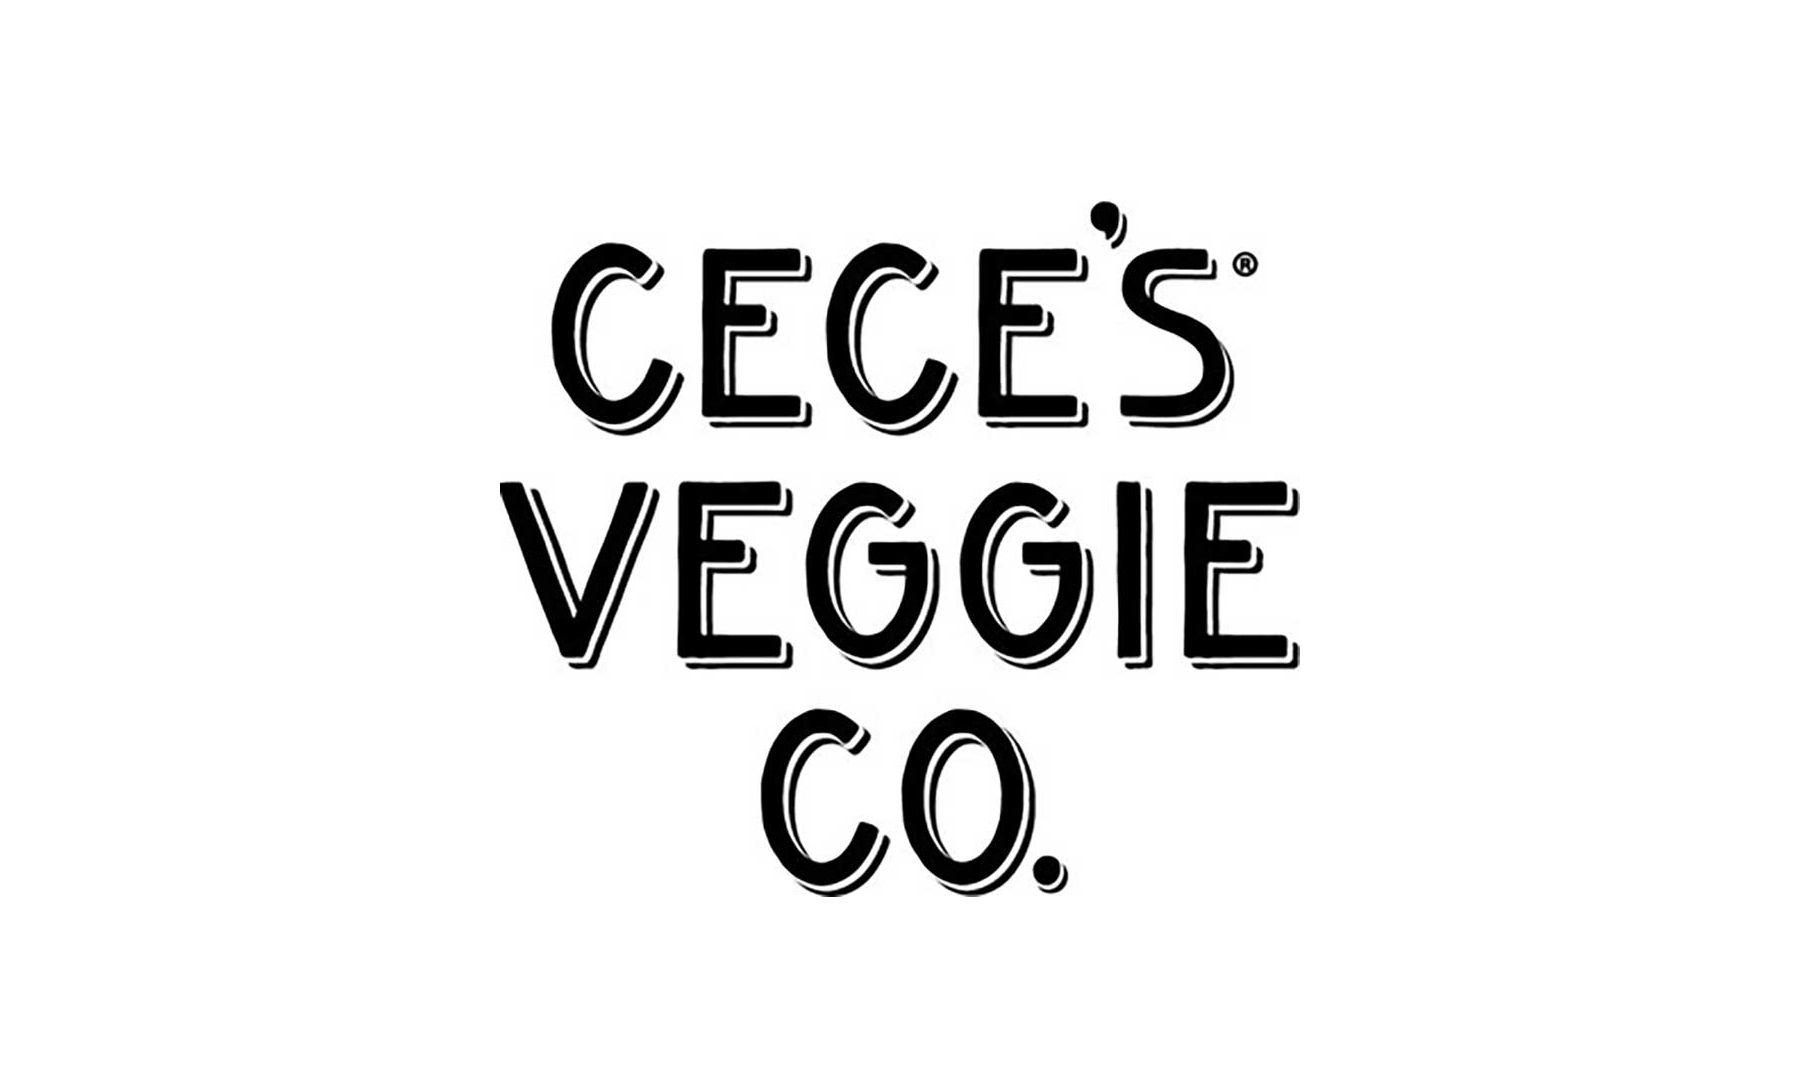 FoodsCo Logo - Former Whole Foods Co-CEO Investing In Cece's Veggie Co.